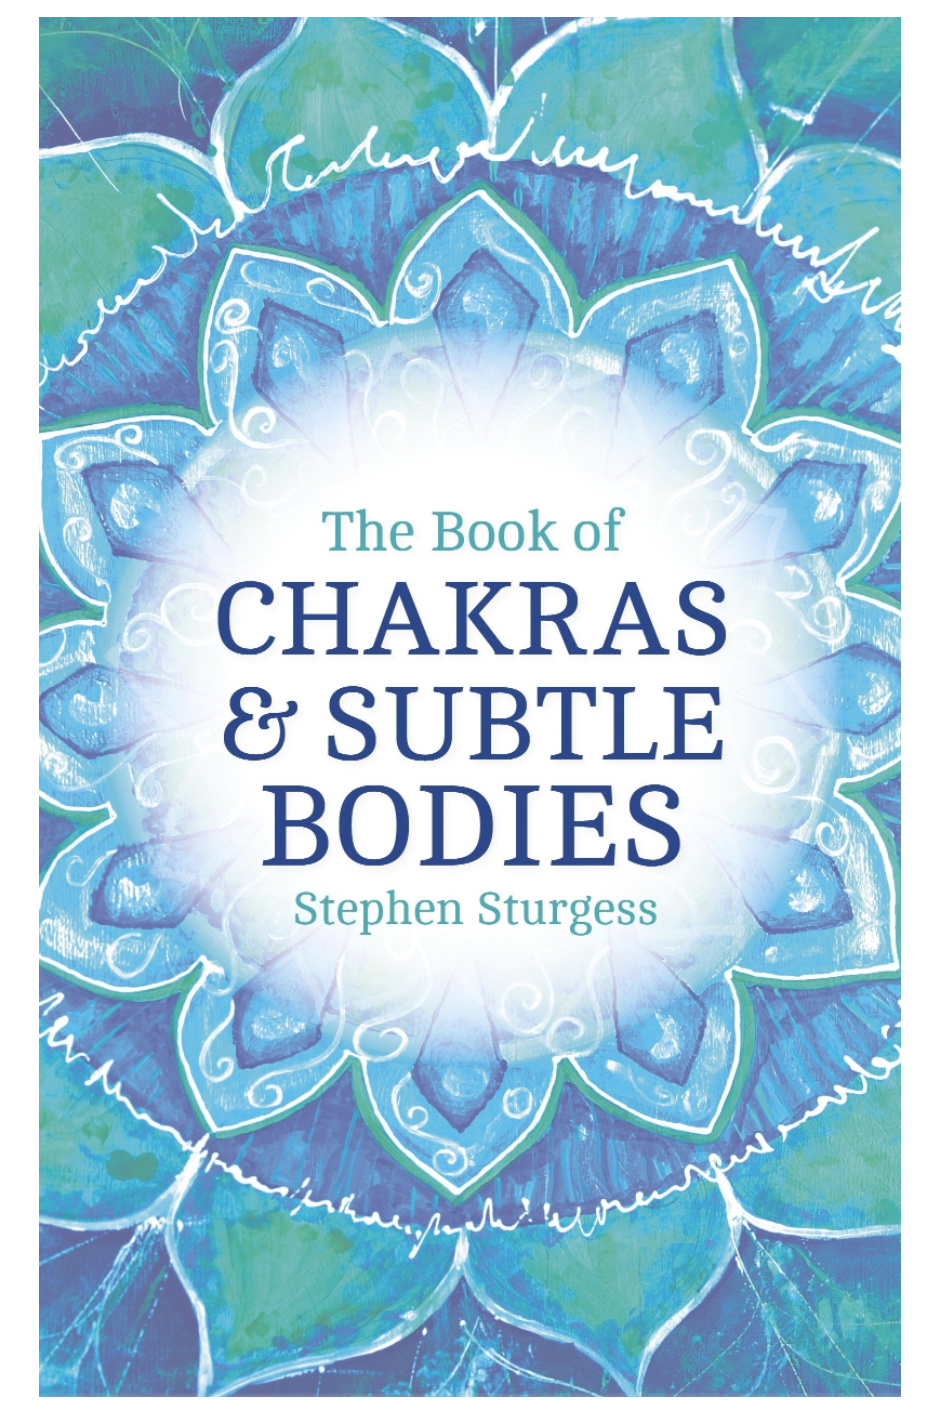 The Book of Chakras & Subtle Bodies: Gateways to Supreme Consciousness